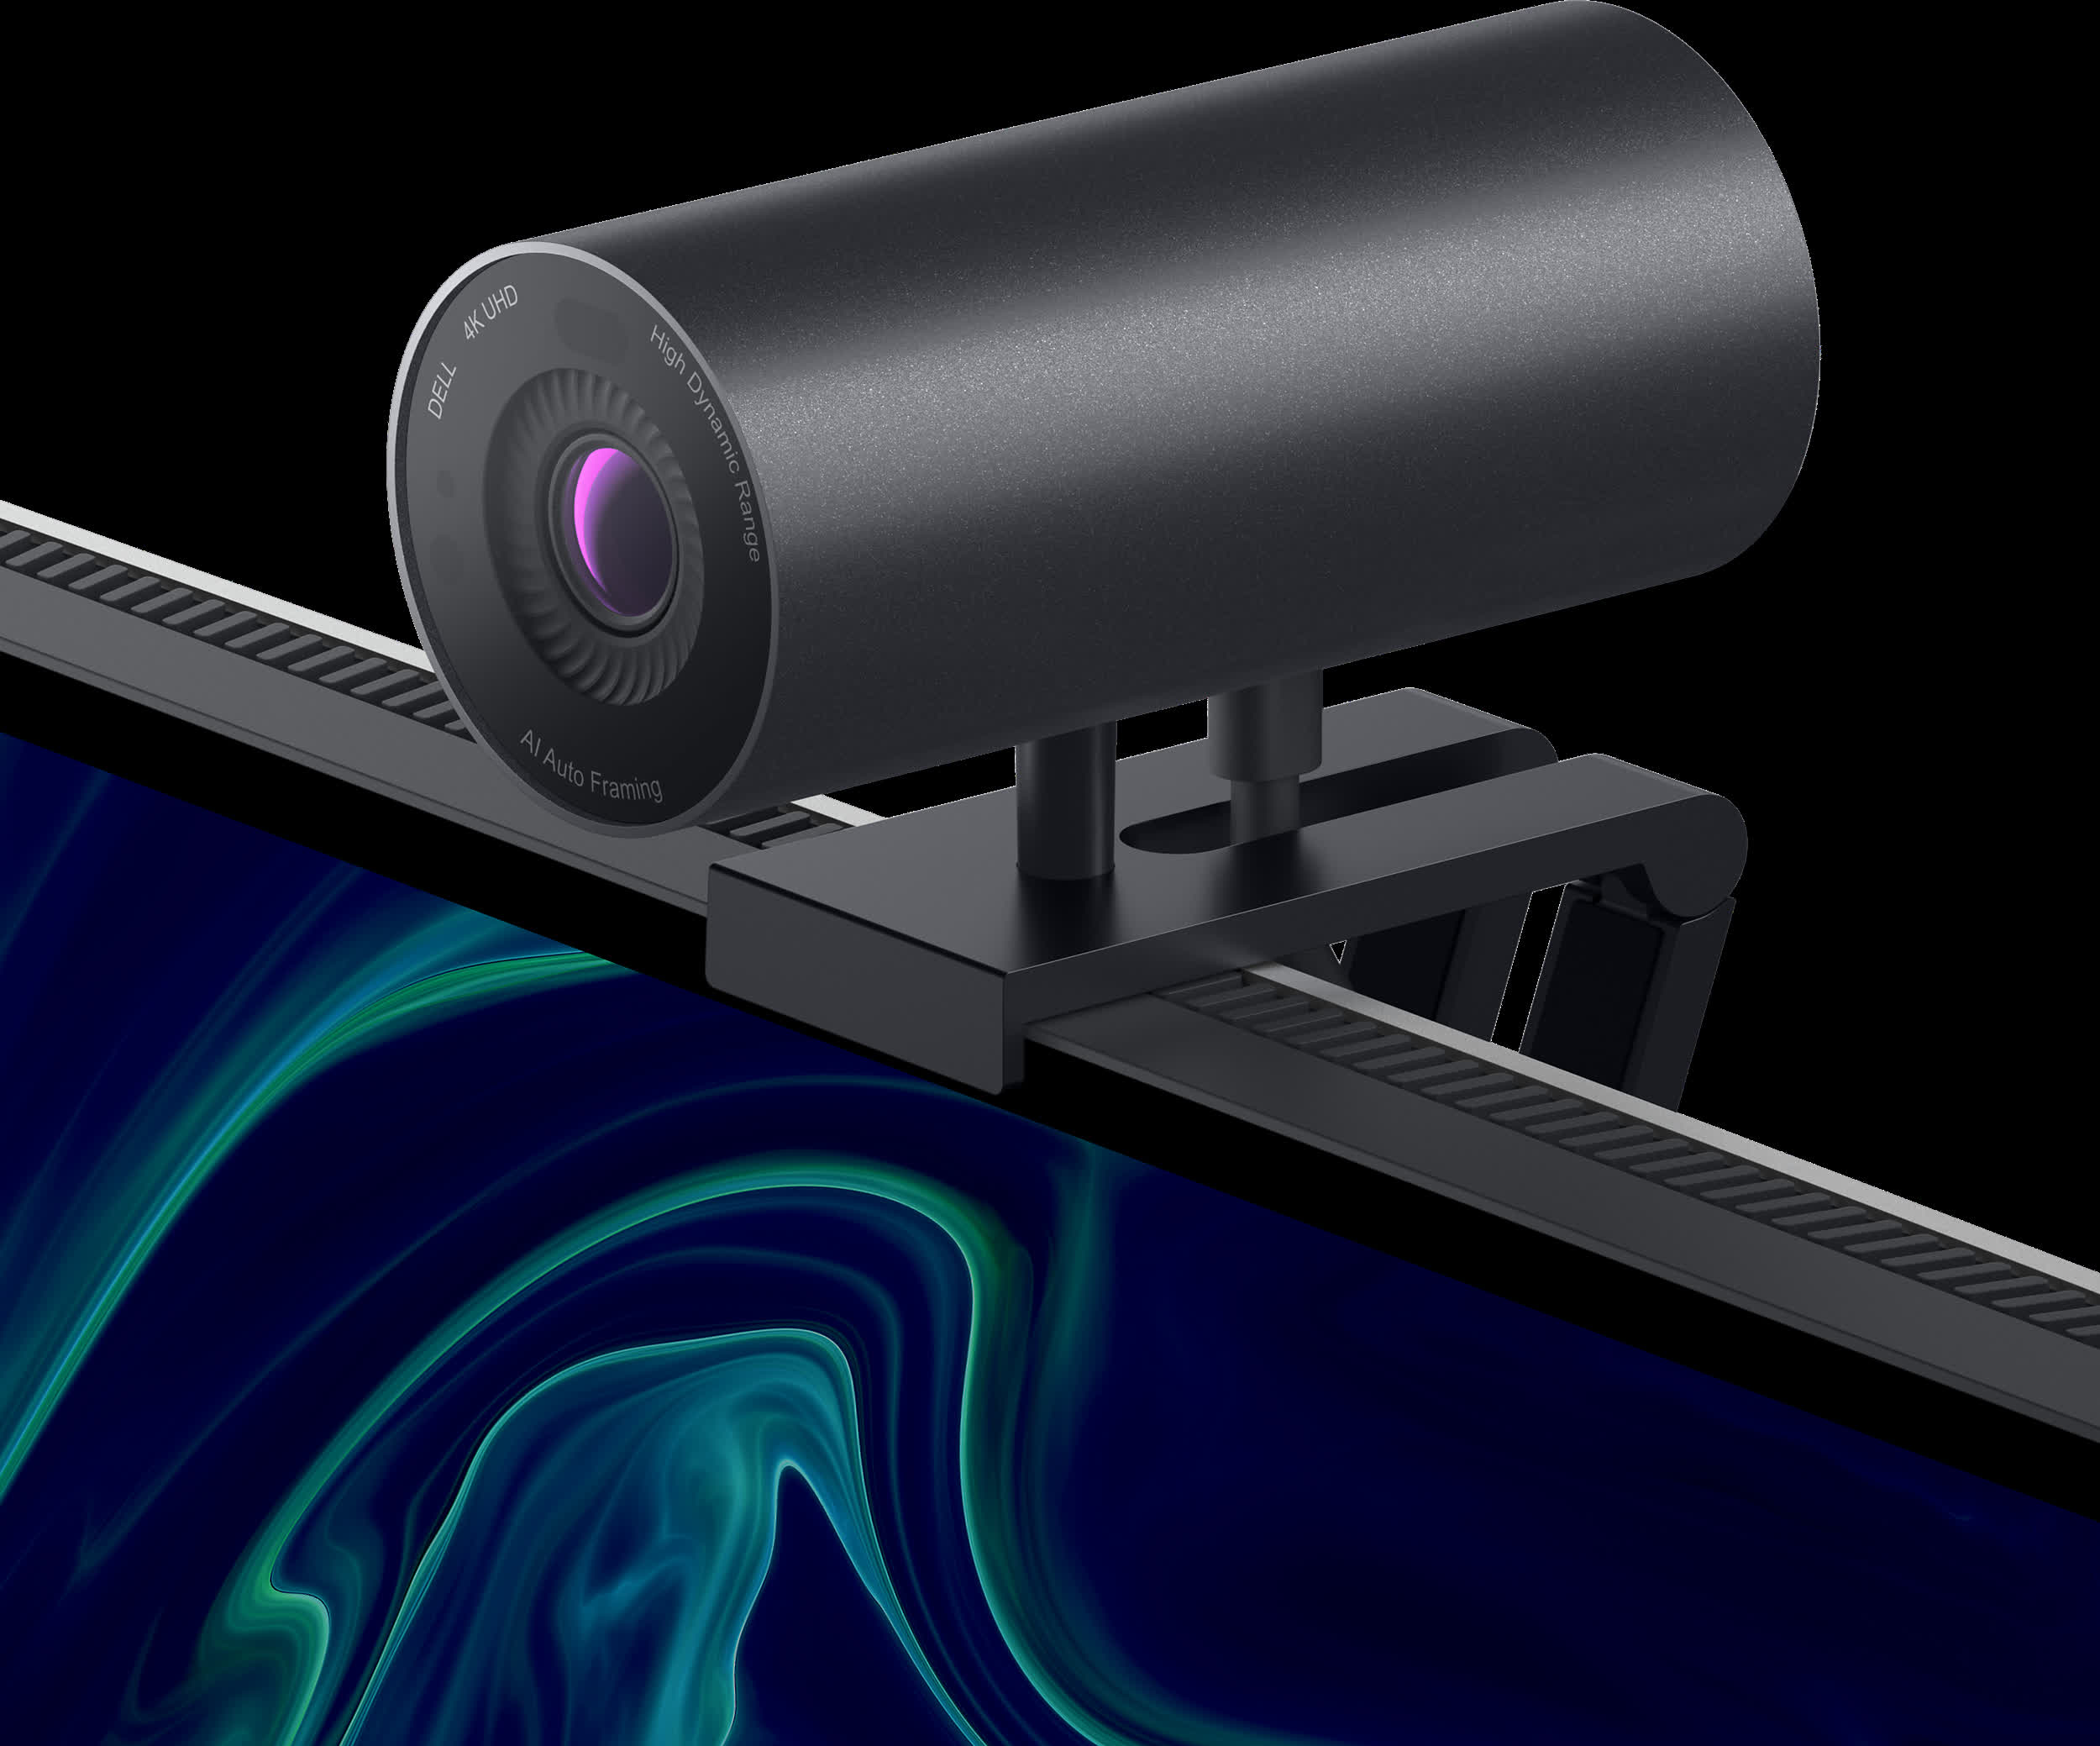 Dell's UltraSharp 4K webcam is a serious competitor for Logitech's Brio 4K